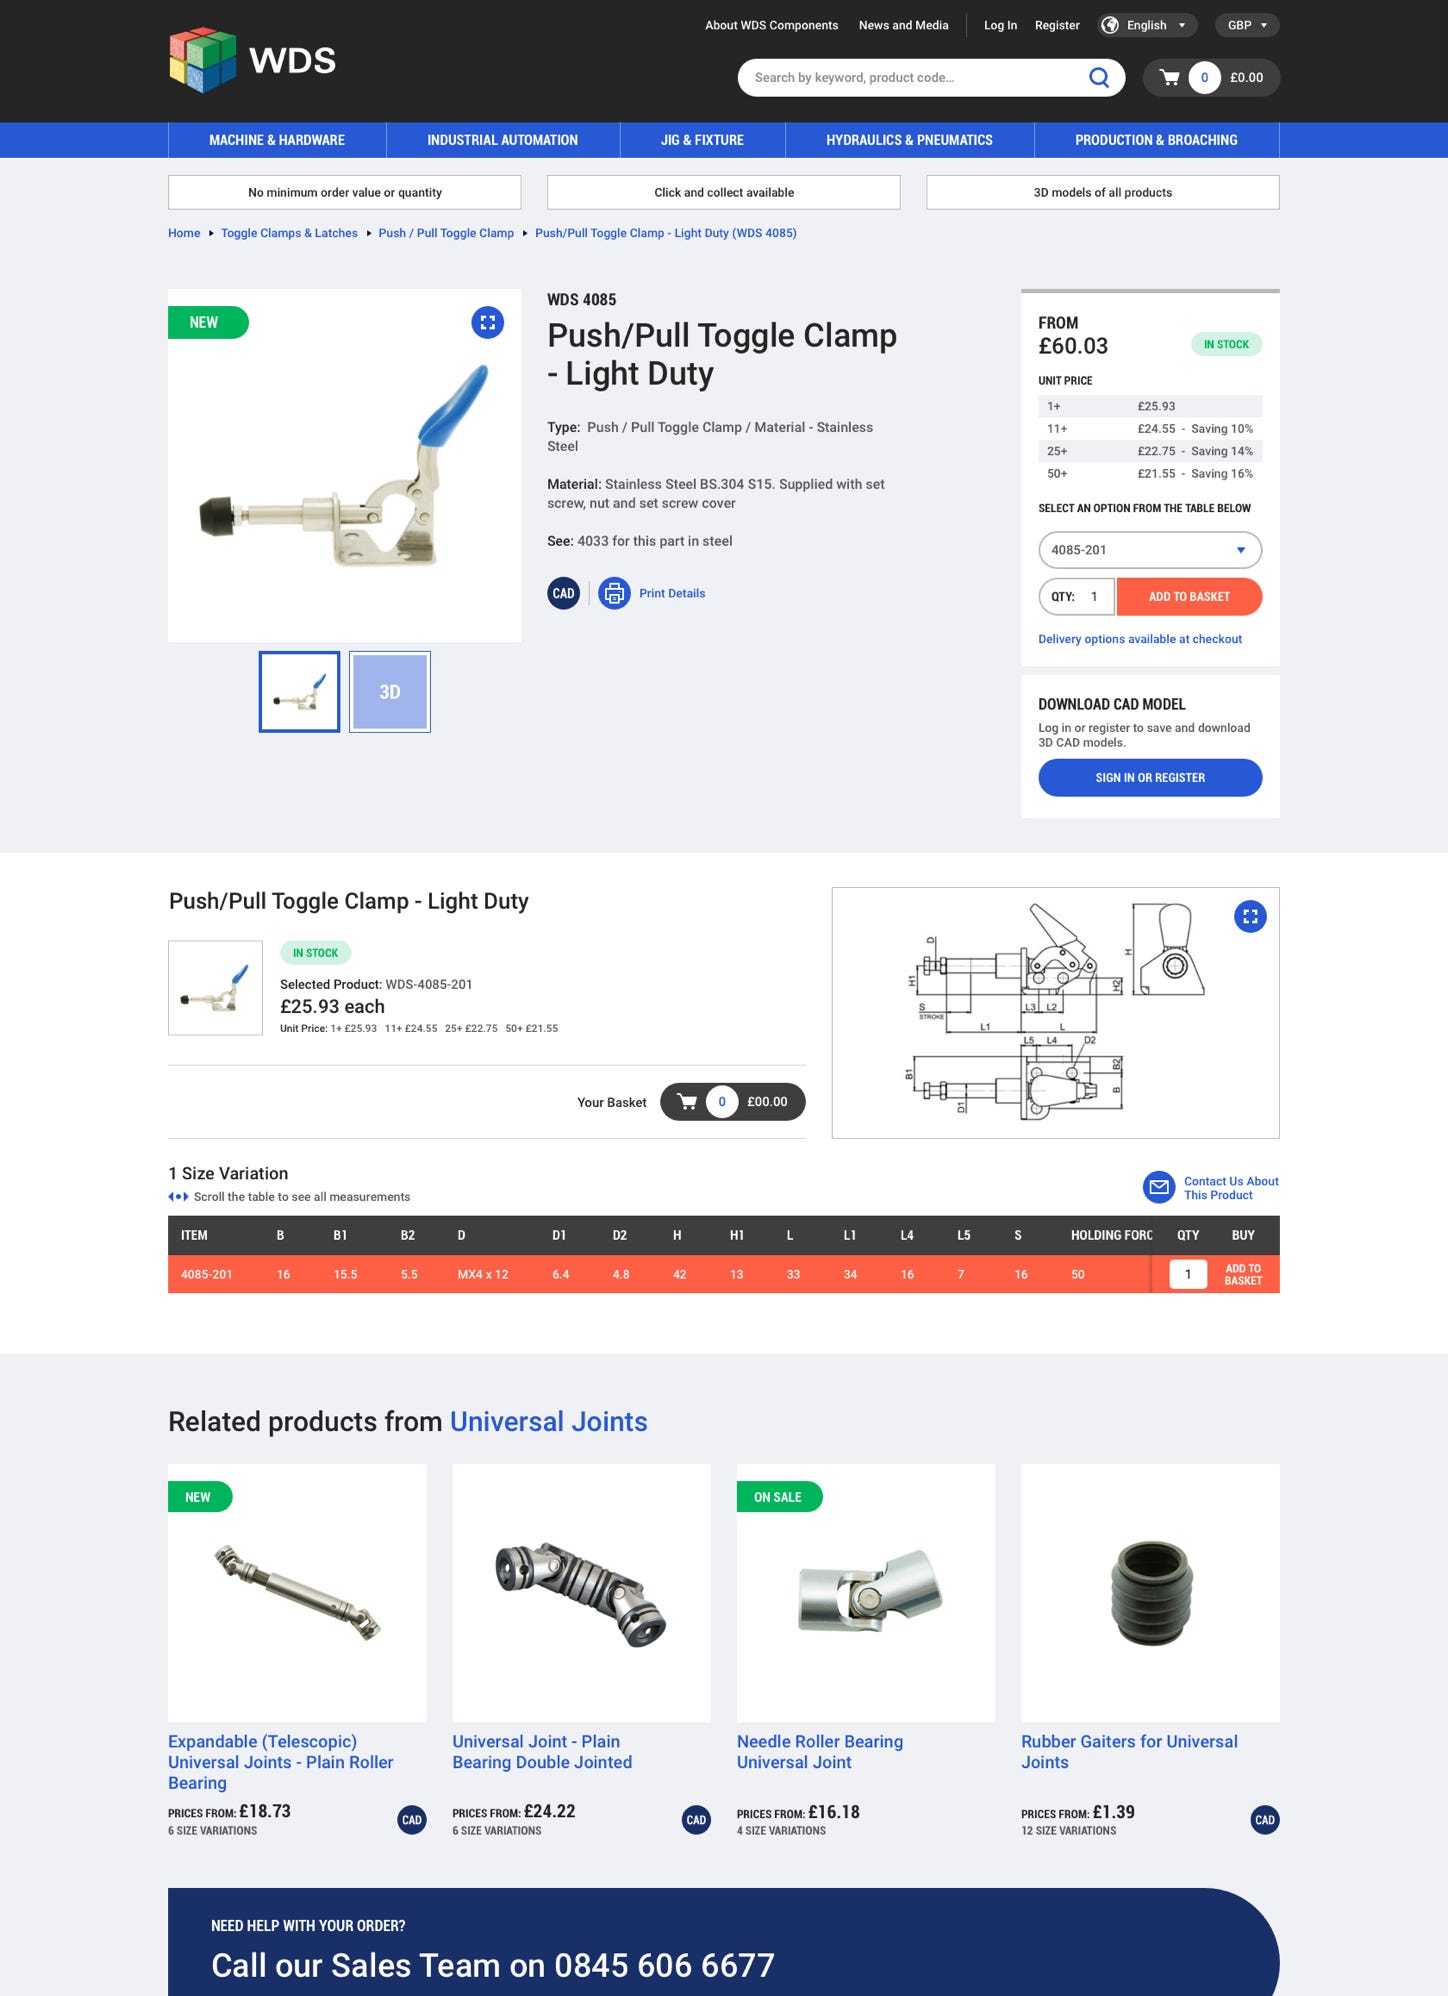 WDS product page design